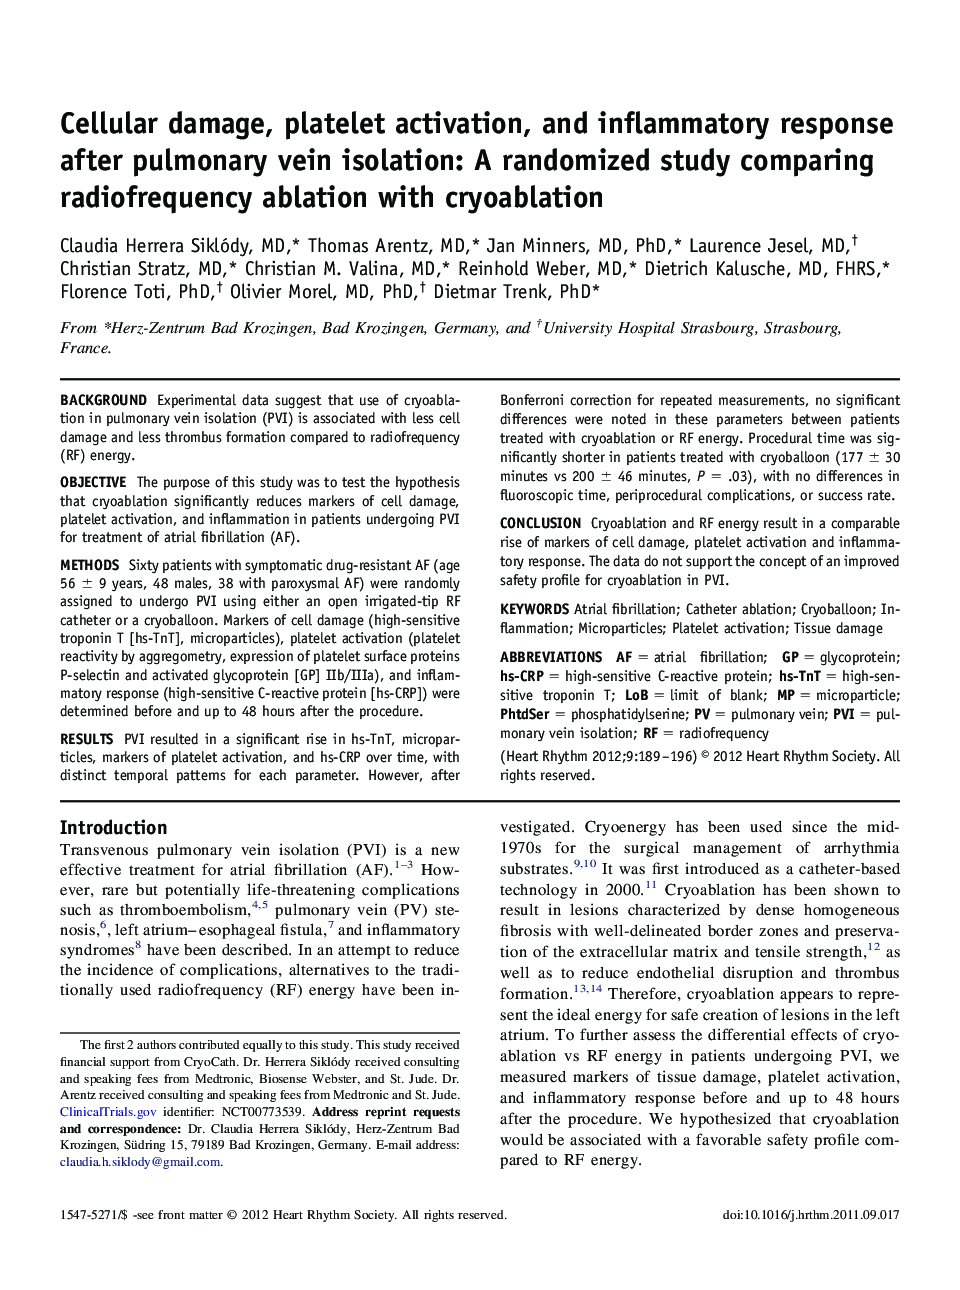 Cellular damage, platelet activation, and inflammatory response after pulmonary vein isolation: A randomized study comparing radiofrequency ablation with cryoablation 